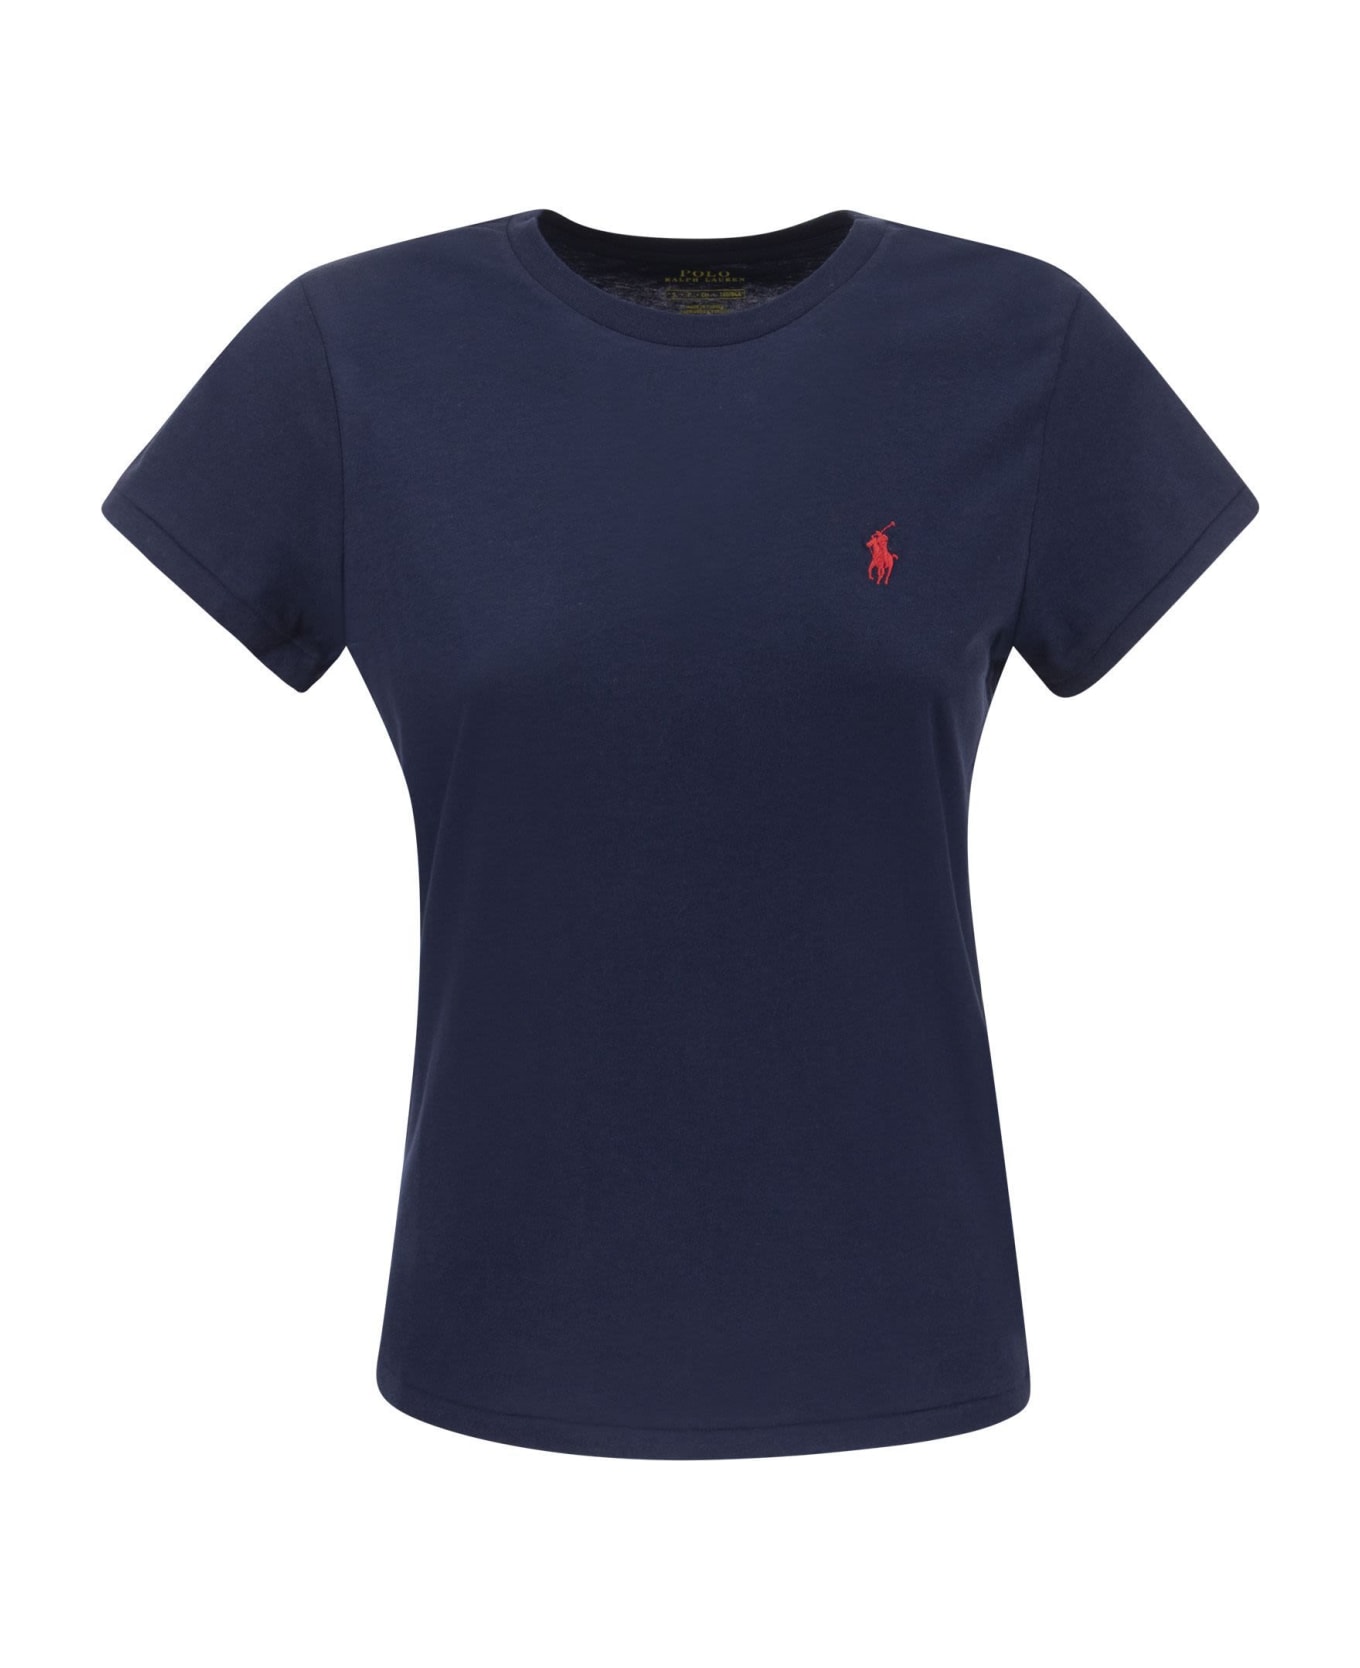 Polo Ralph Lauren Blue T-shirt With Contrasting Pony - Blue